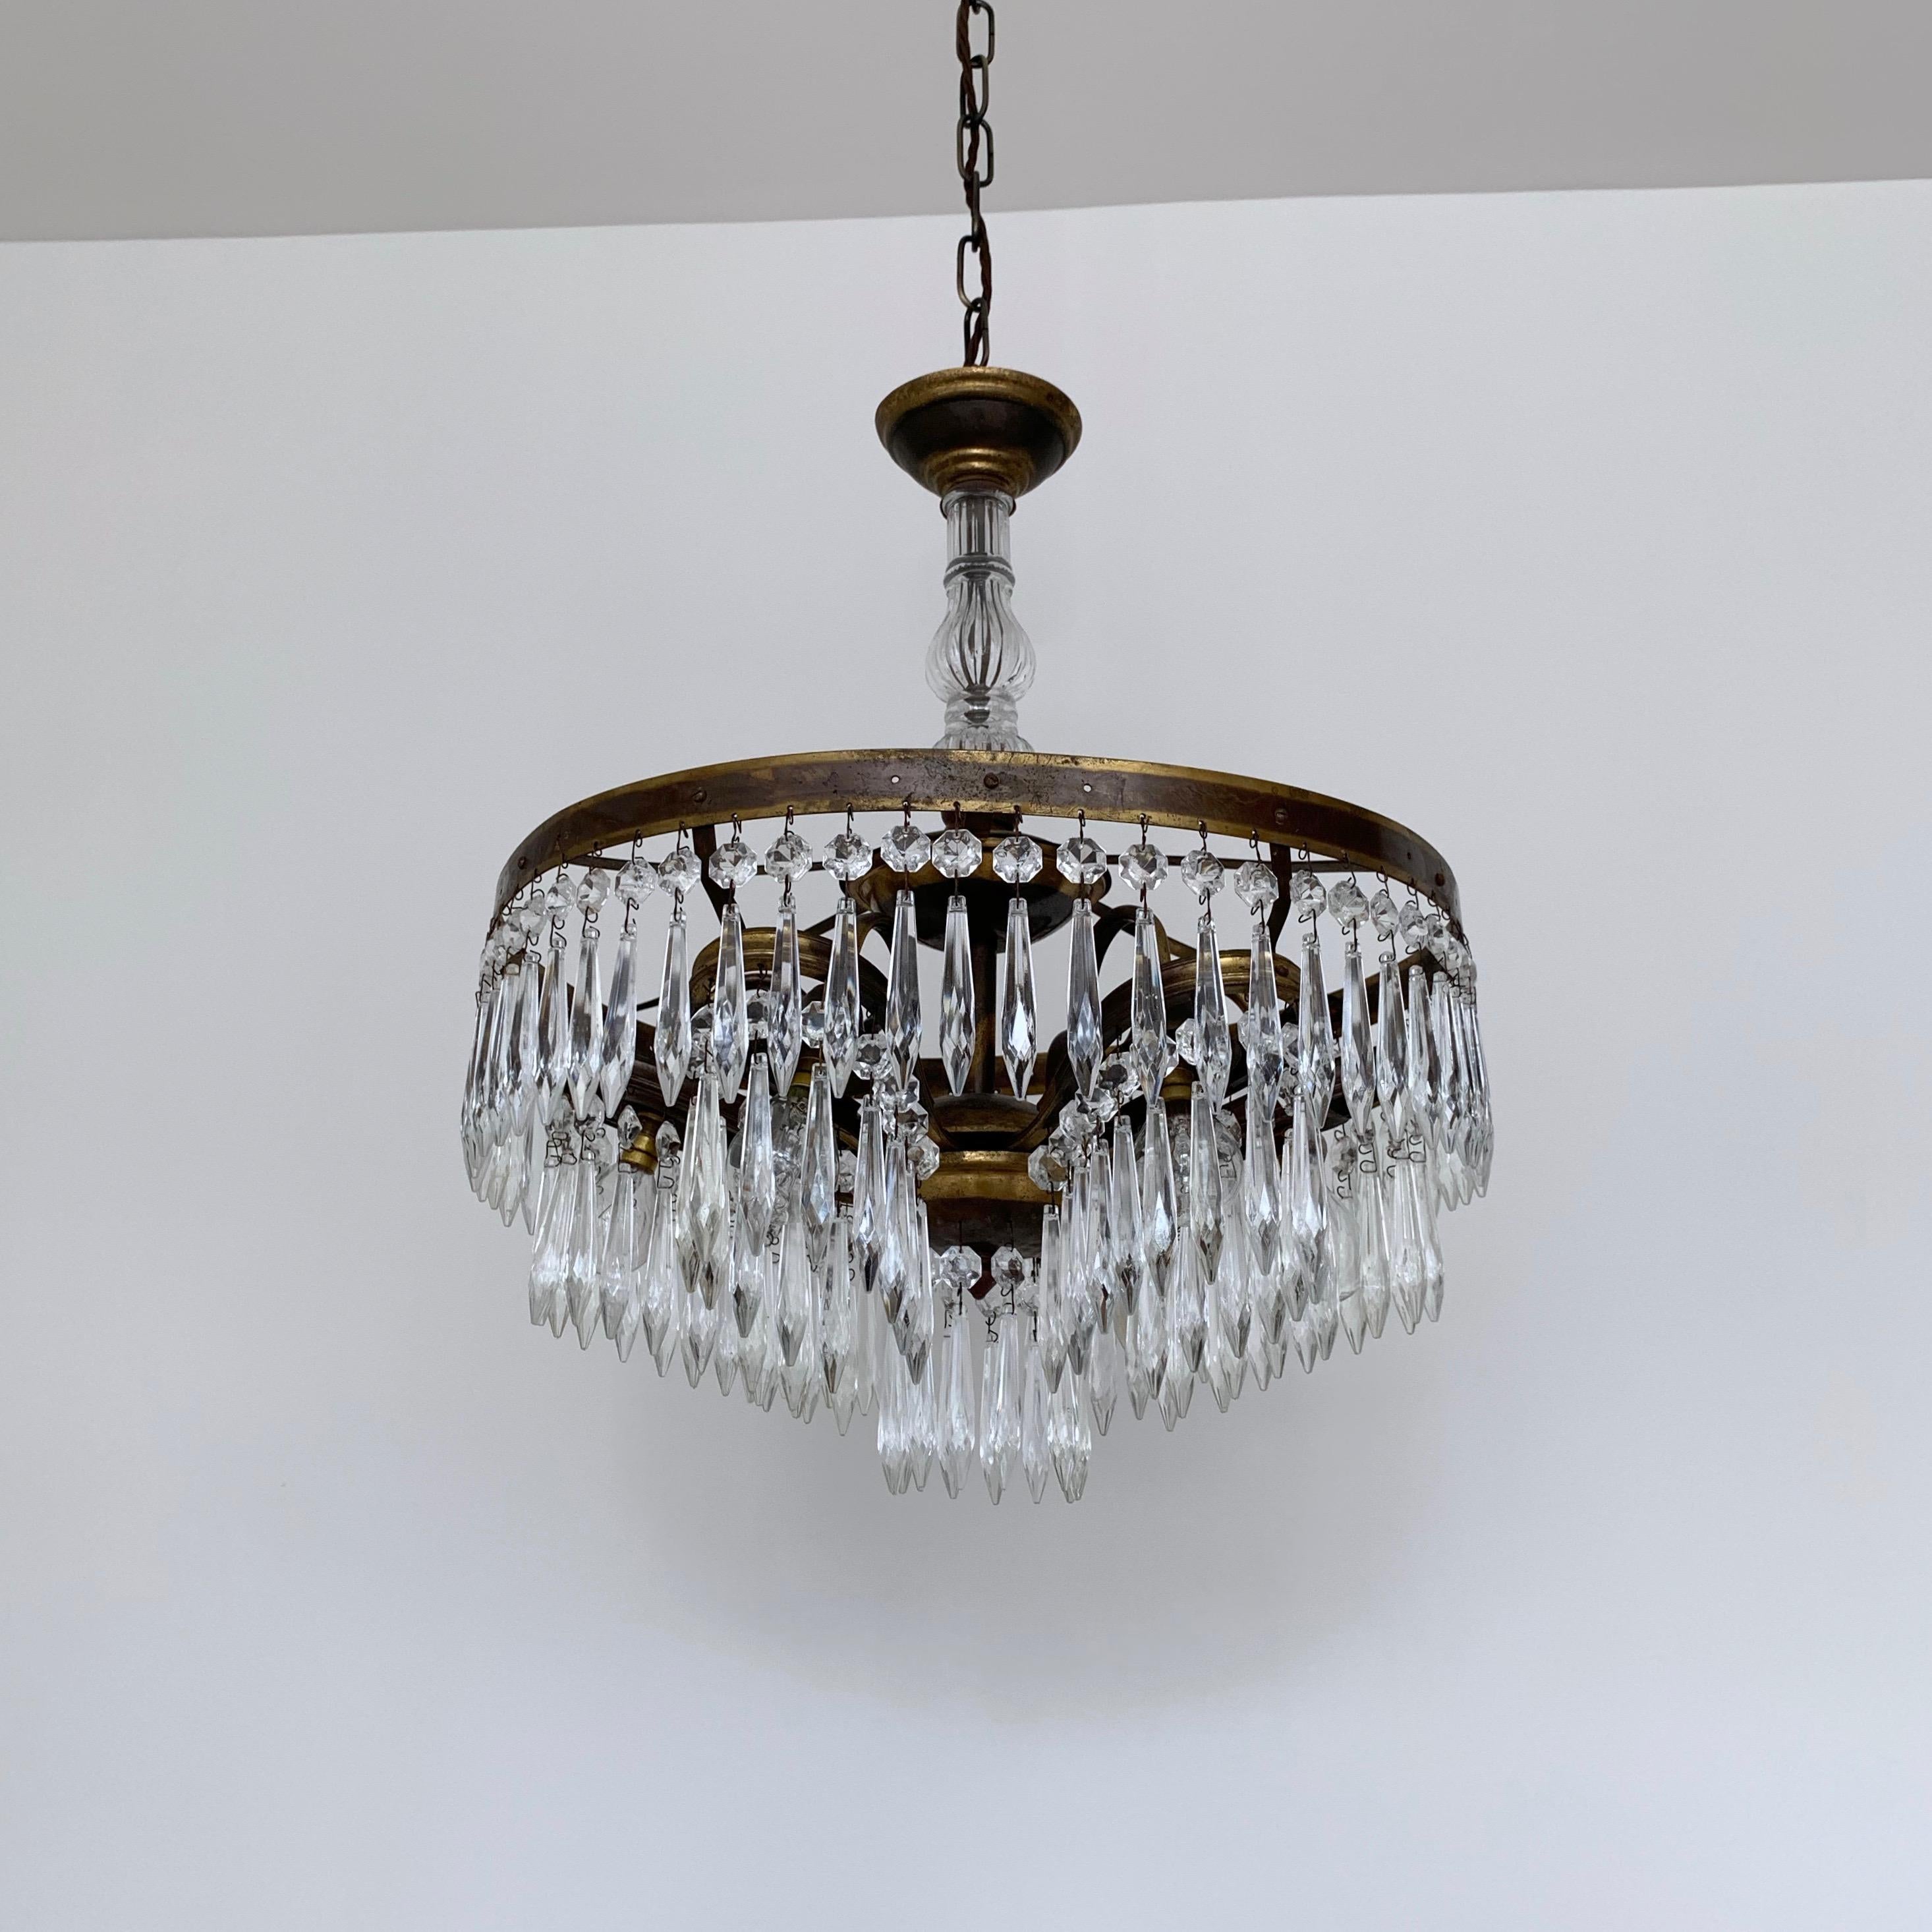 These continental waterfall chandeliers are made to order. Originating from early 1900s Italy. It has a delicate frame with central glass stem and six lower petal tiers all adorned with icicle drops. The lamps face down within each lower petal tier